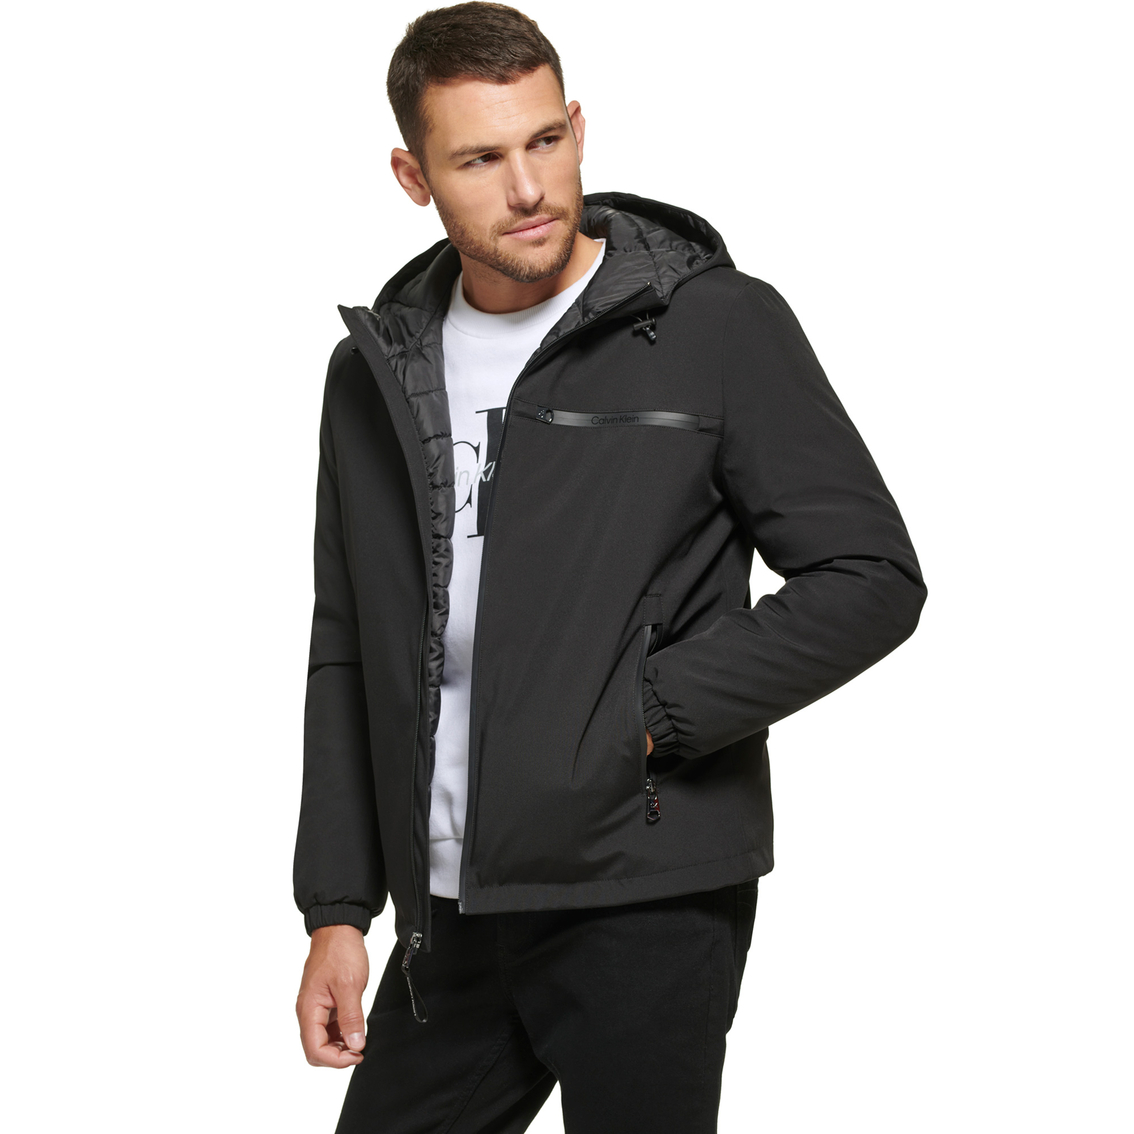 Calvin Klein Hooded Stretch Jacket - Image 6 of 10